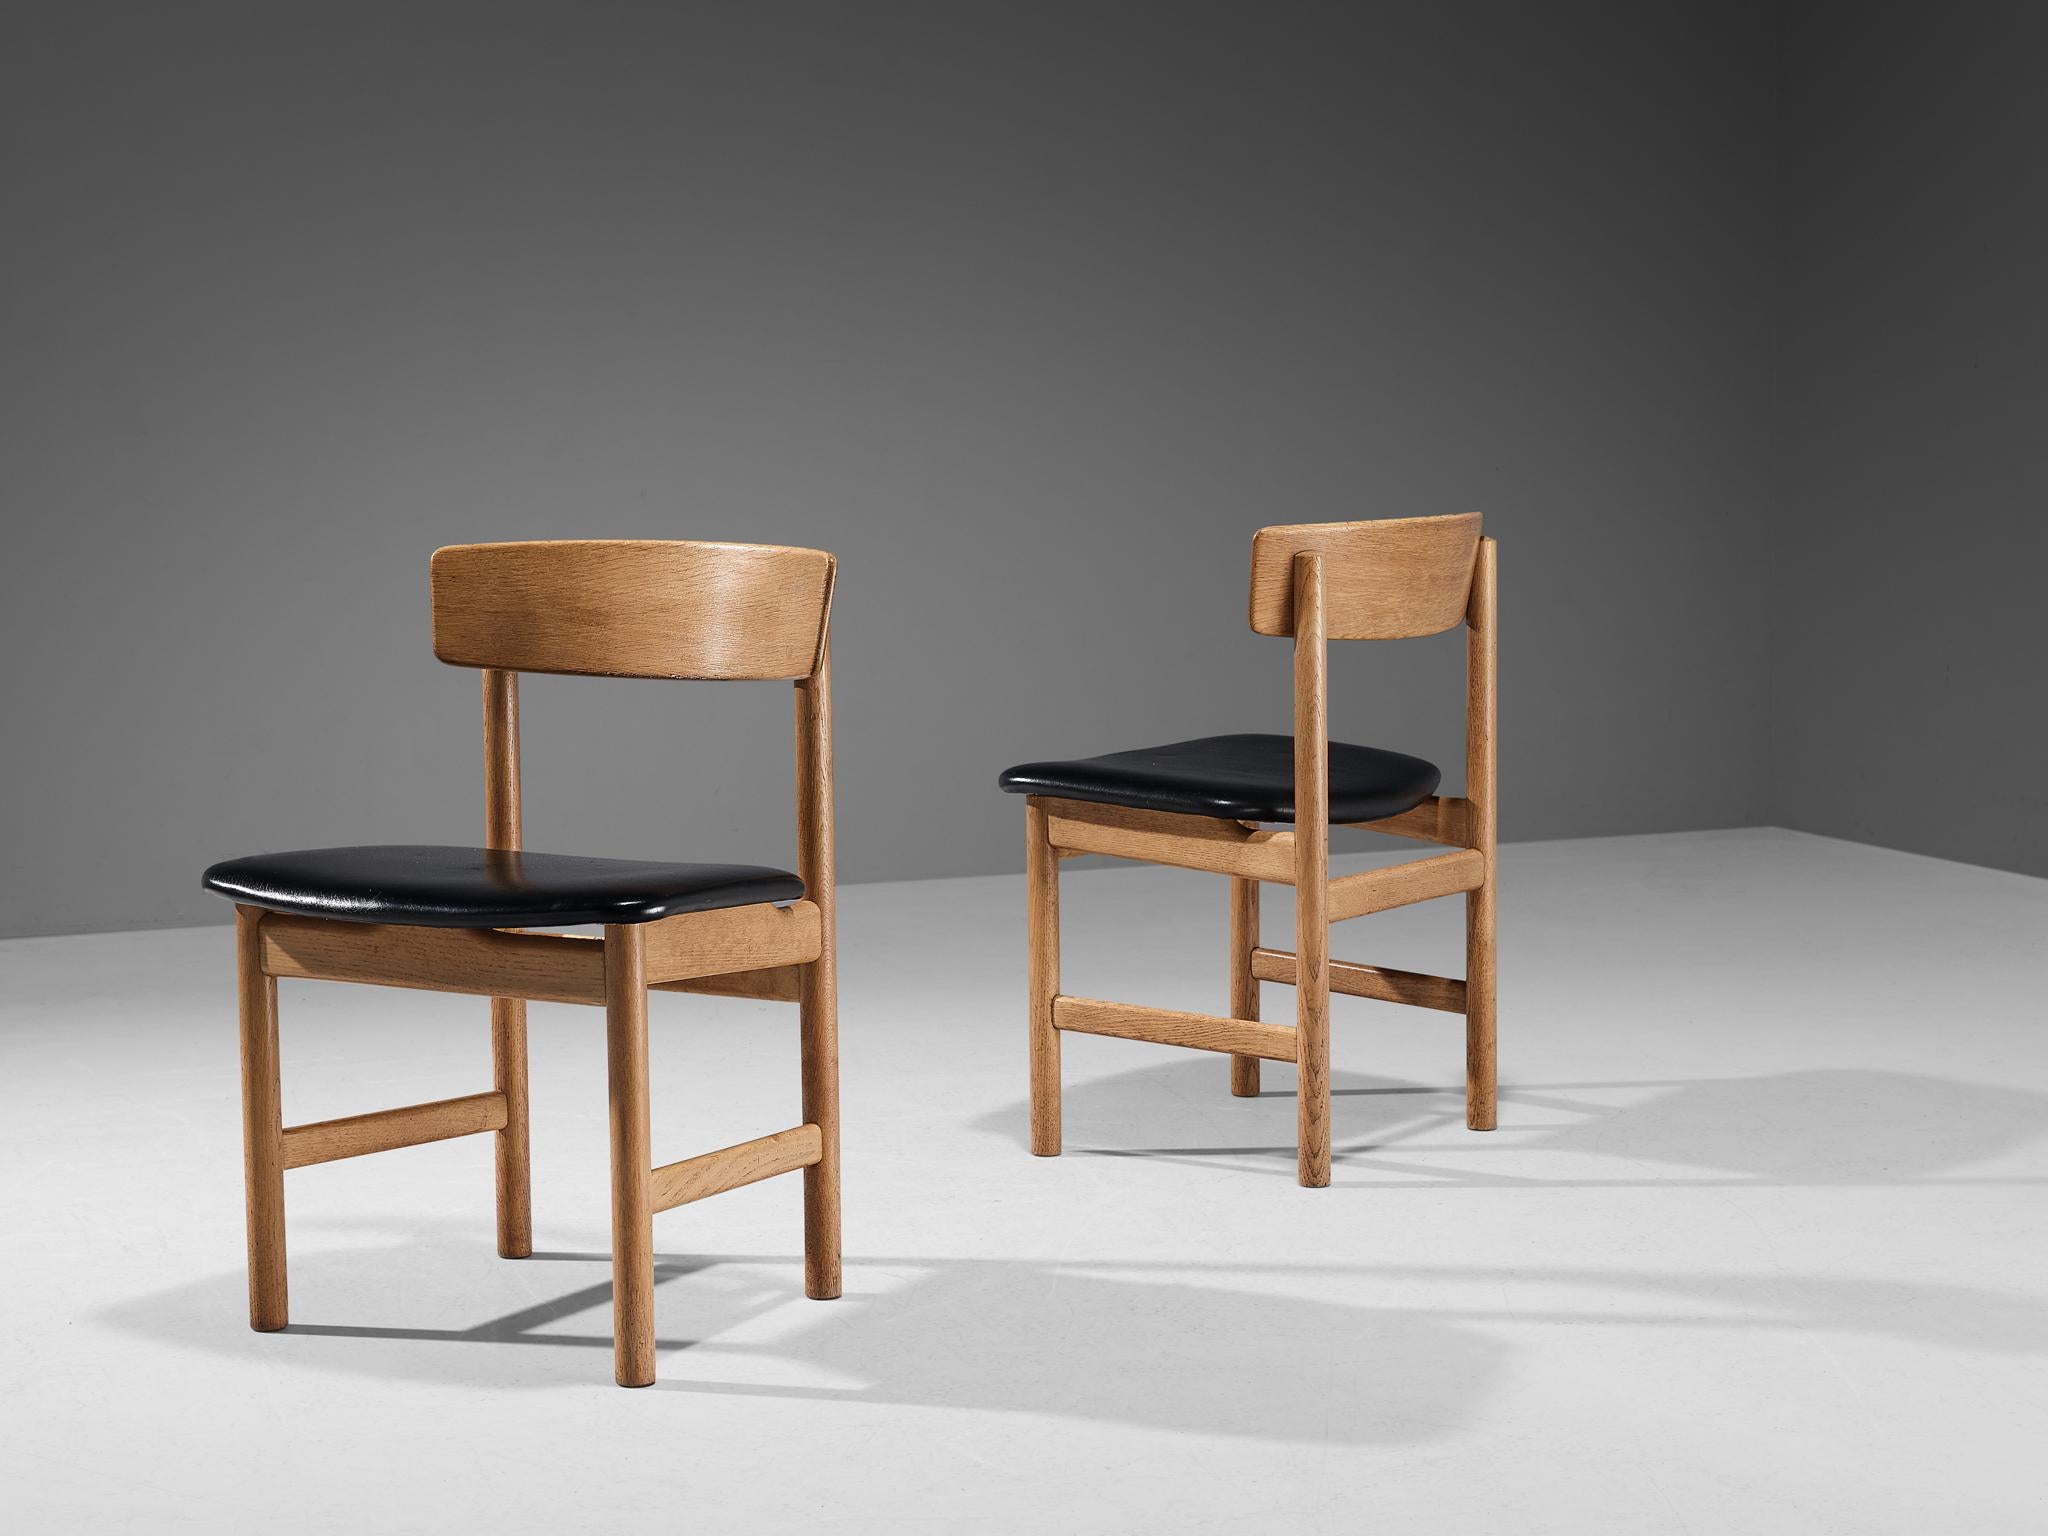 Børge Mogensen for Søborg Møbler, pair of dining chairs, model 3236, oak, leather, Denmark, 1956

This design features a geometric backrest that slightly curves to provide comfort for the user. Space between the back and the seat creates an airy and